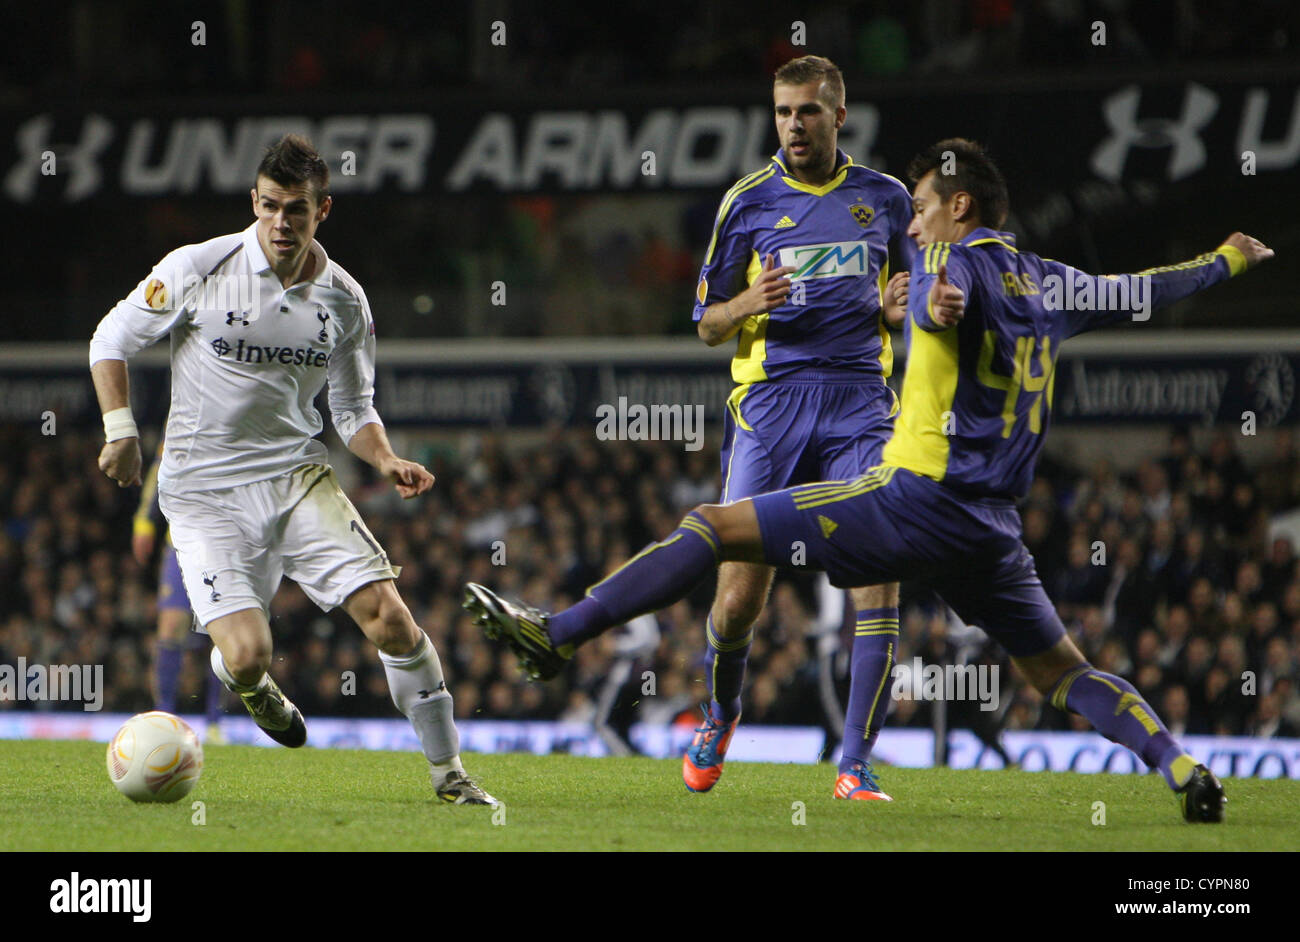 08.11.2012. North London, England.   Gareth Bale of Tottenham Hotspur in action during the Europa League Group J match between Tottenham Hotspur and NK Maribor from White Hart Lane, London Stock Photo